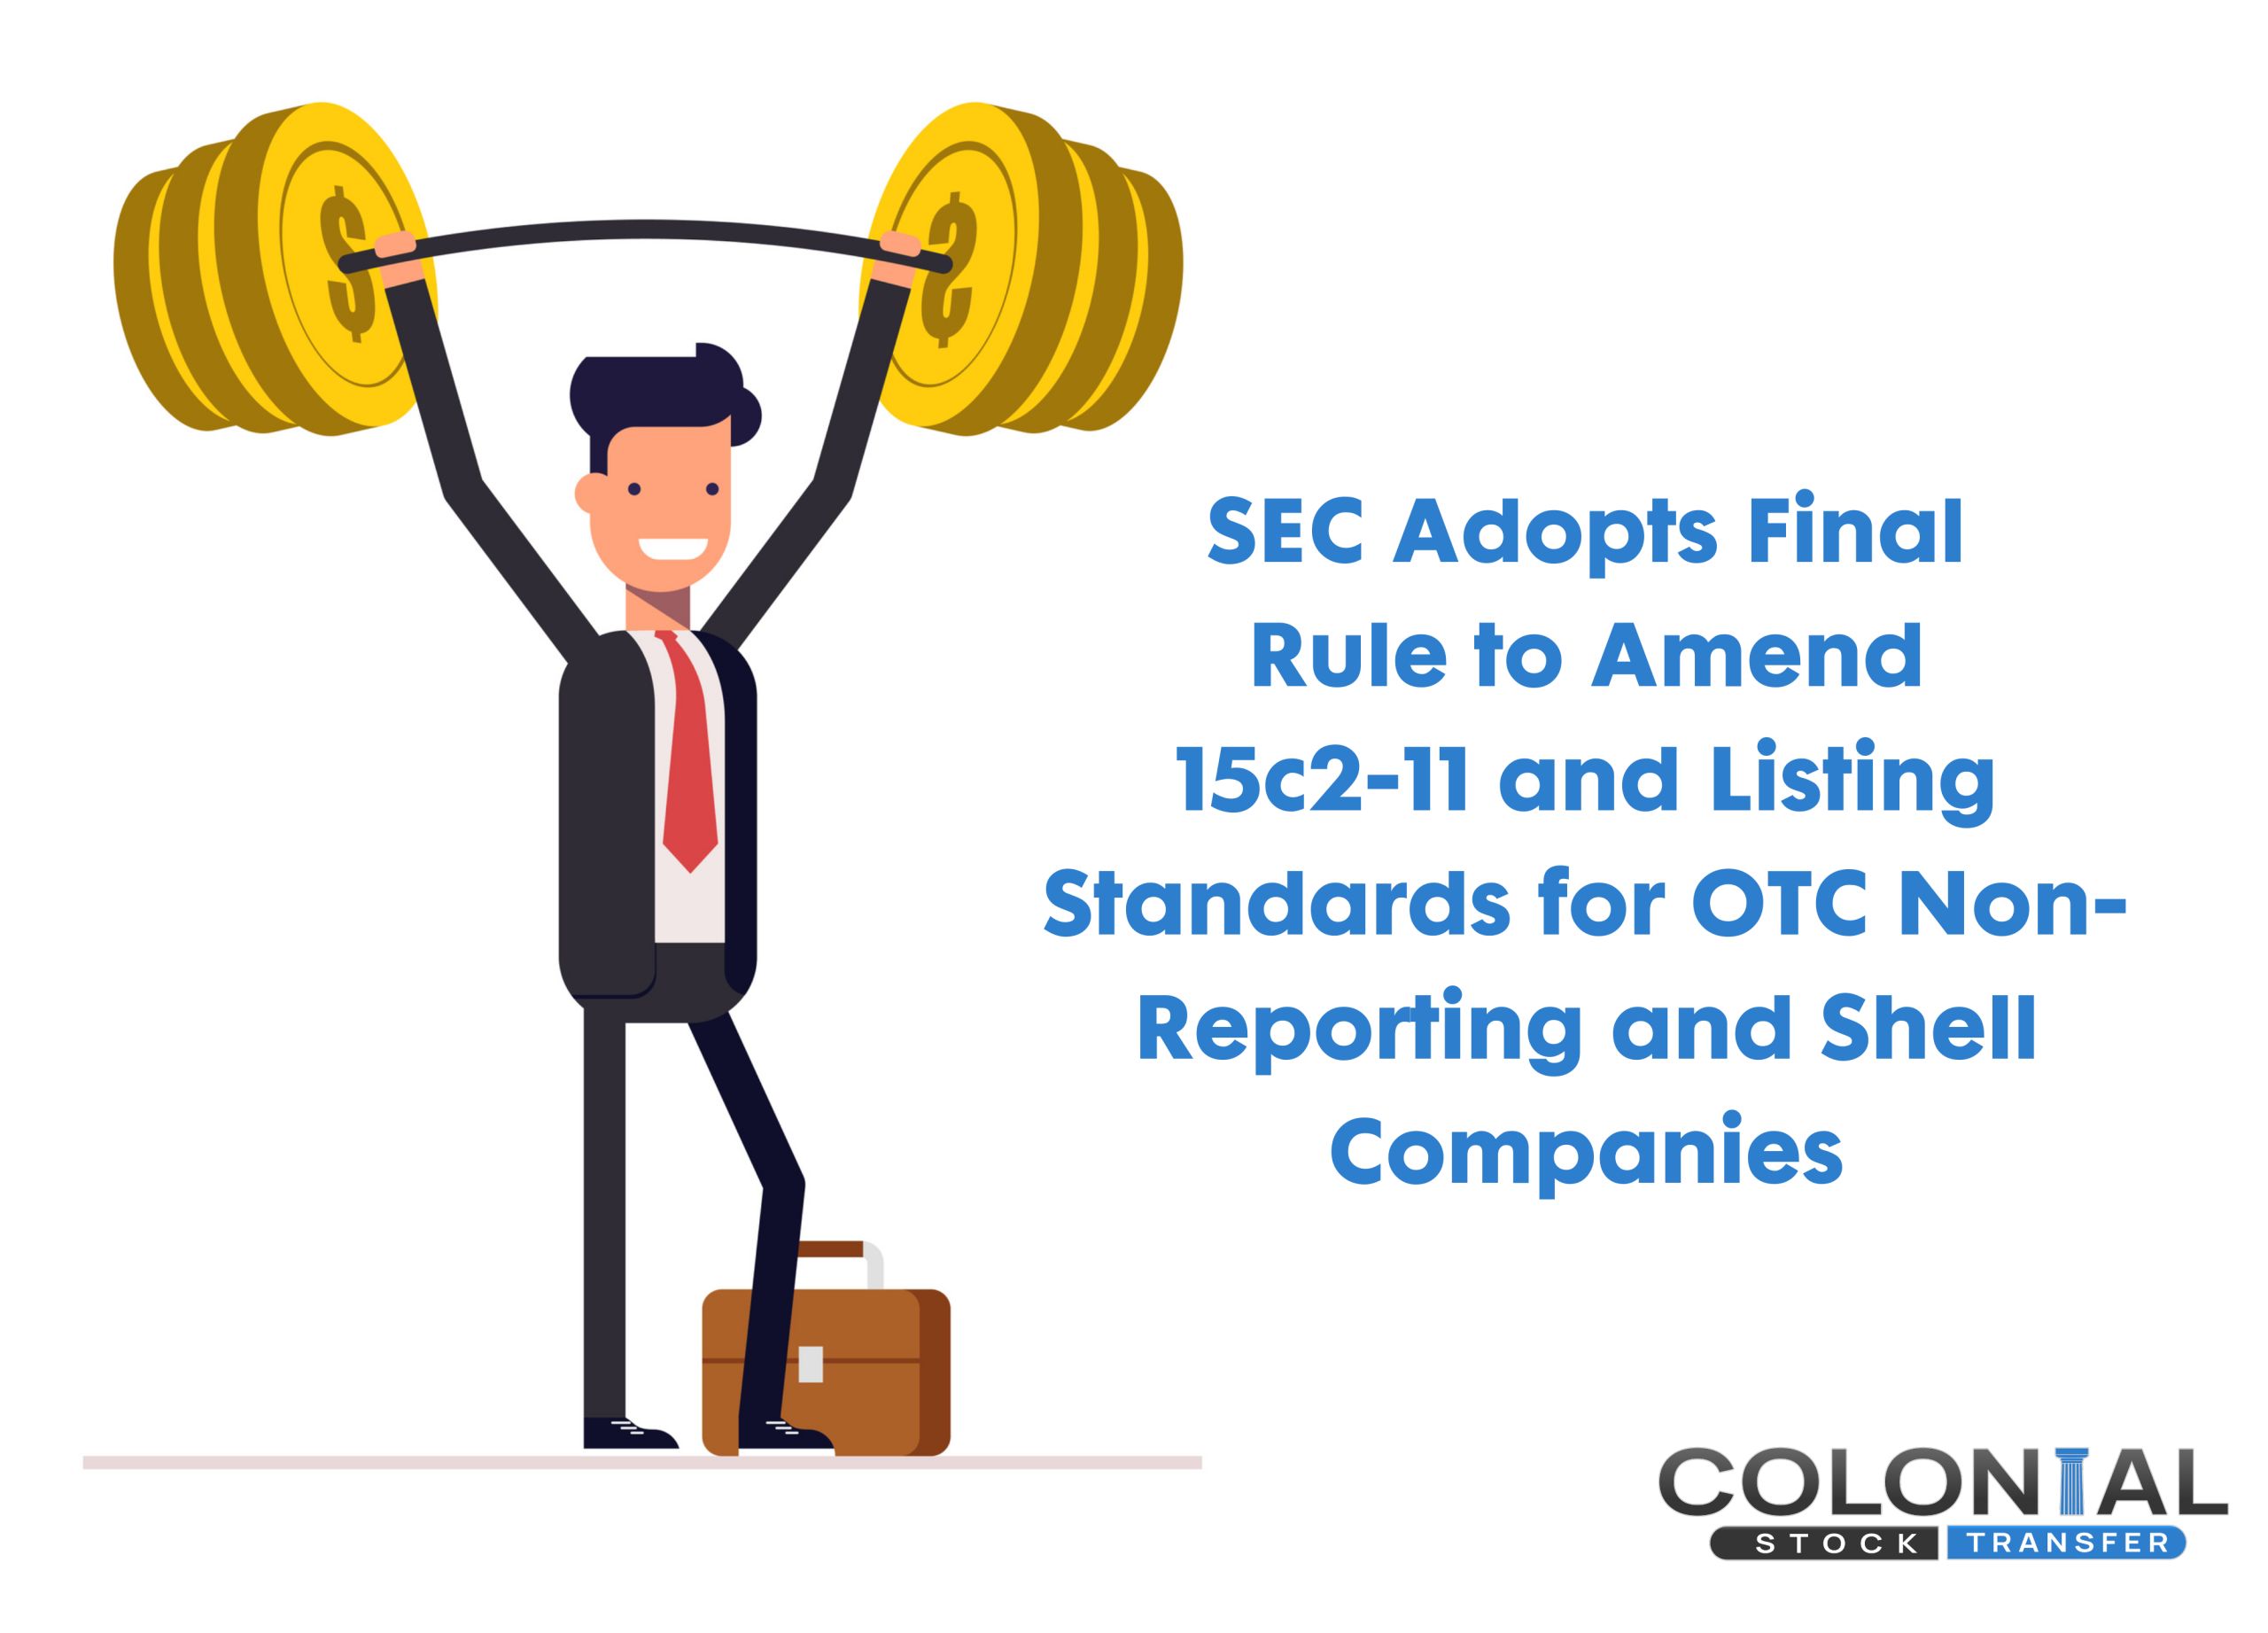 SEC Adopts Final Rule to Amend 15c2-11 and Listing Standards for OTC Non-Reporting and Shell Companies